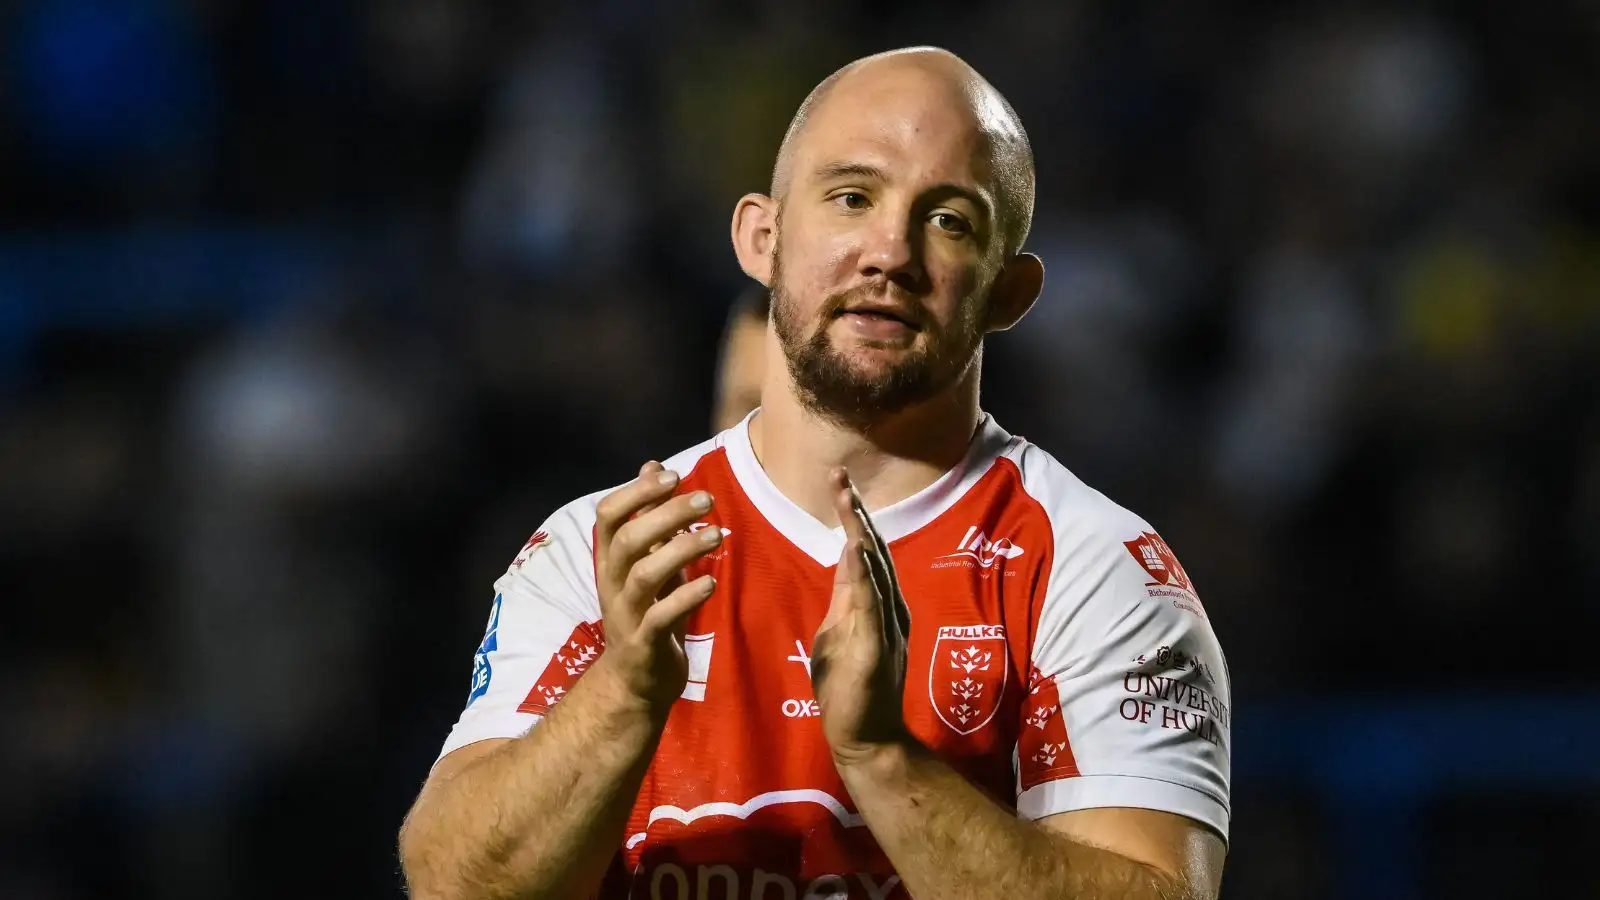 Hull KR ace George King: ‘We’ve got to flip the switch and put Wembley behind us’; ‘We will get there again’